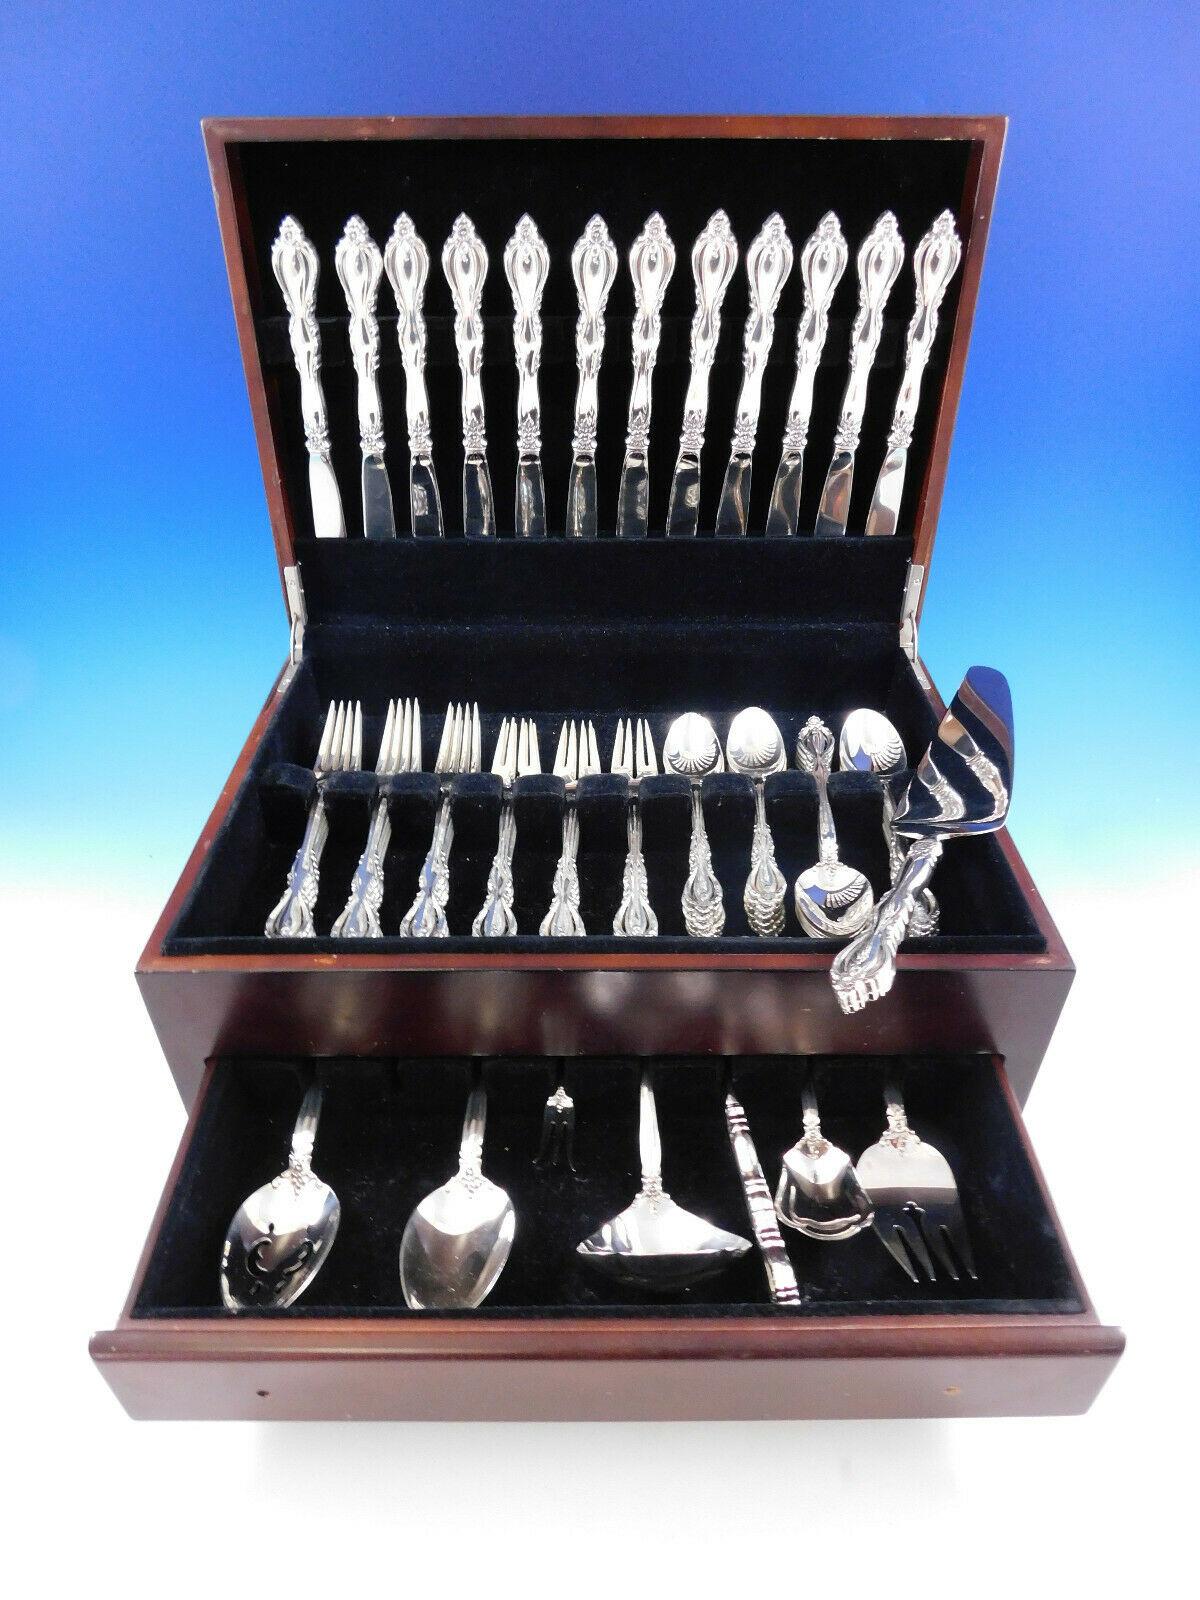 Exquisite Grande Regency by International sterling silver Flatware set, 68 pieces. This set includes:



12 Knives, 9